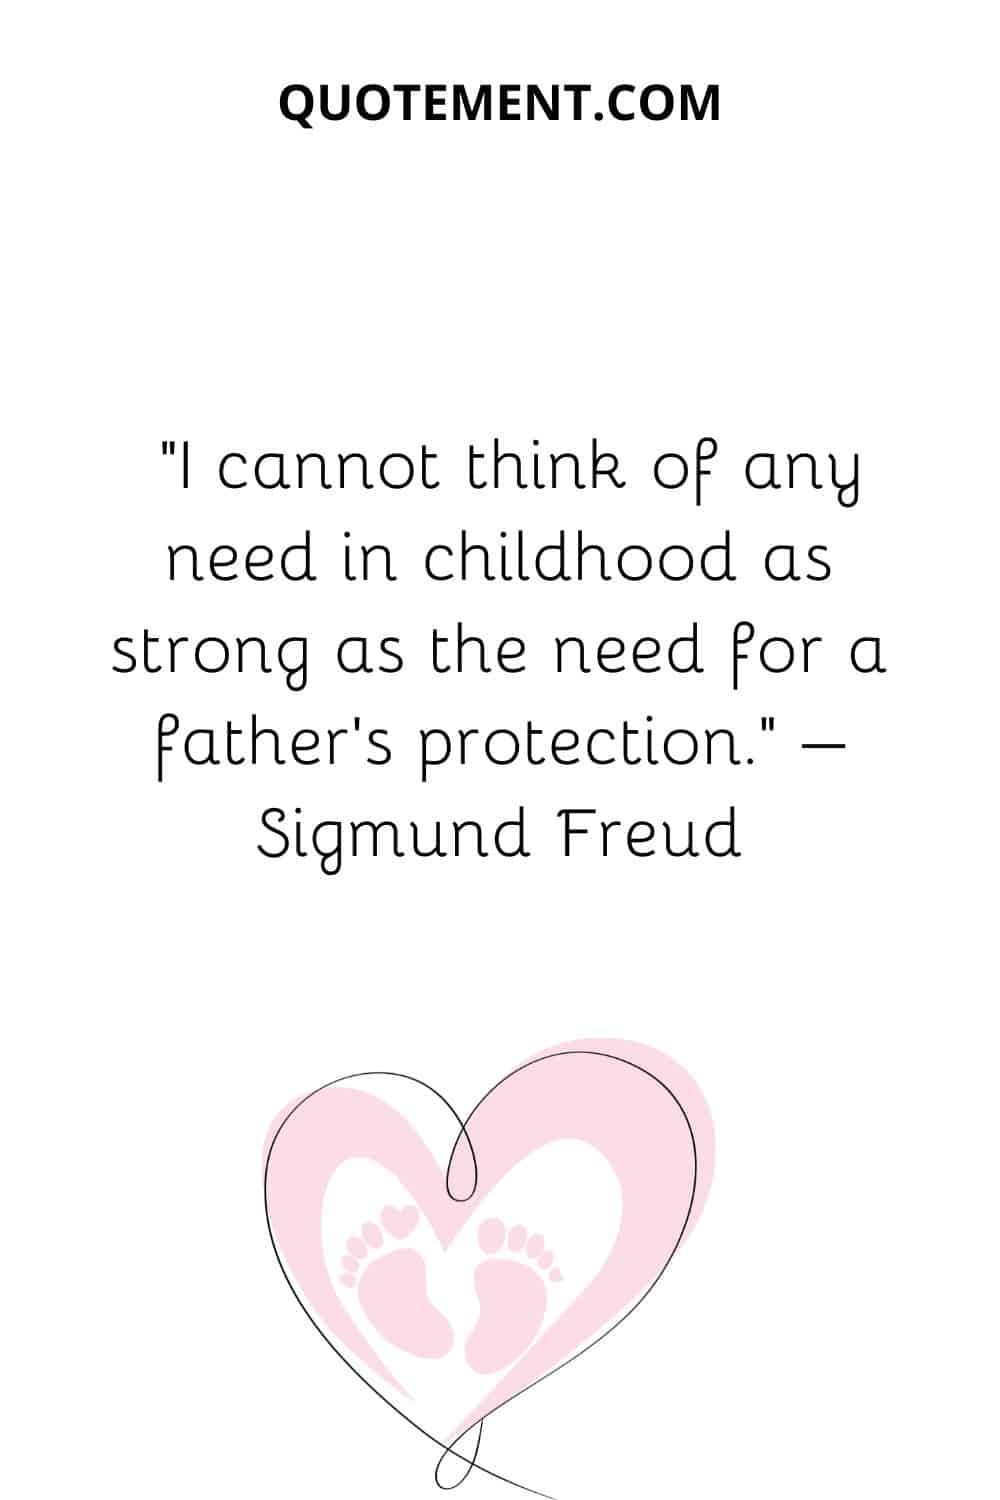 I cannot think of any need in childhood as strong as the need for a father’s protection